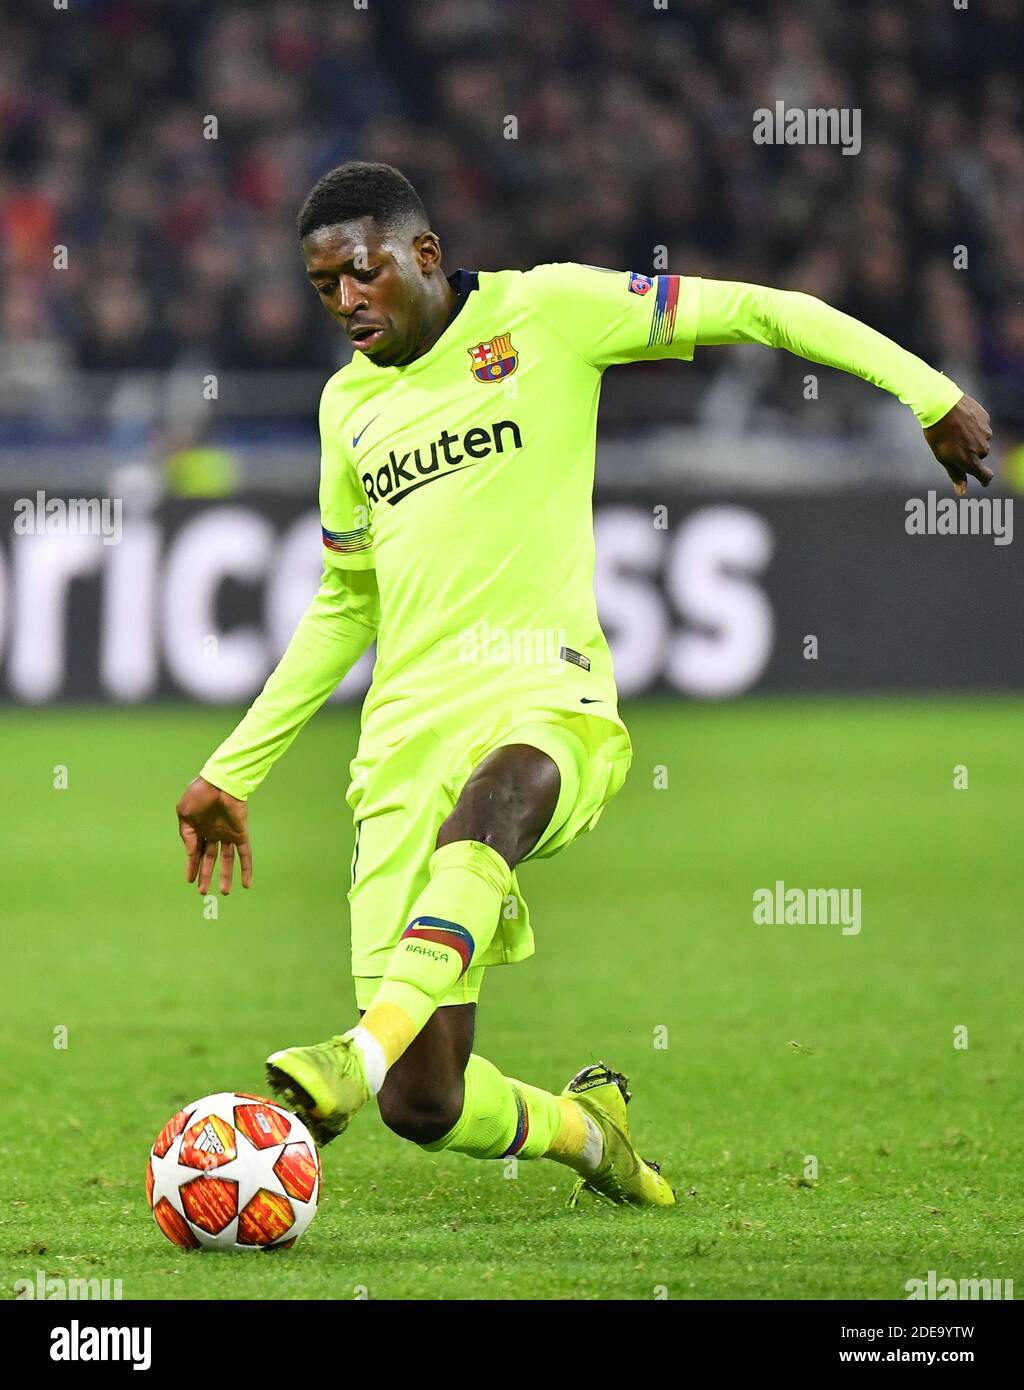 Barcelona's Moussa Dembele during the UEFA Champions League round of 16 first leg football match between Lyon (OL) and FC Barcelona on February 19, 2019, at the Groupama Stadium in Decines-Charpieu, near Lyon, central-eastern France. Photo by Christian Liewig/ABACAPRESS.COM Stock Photo